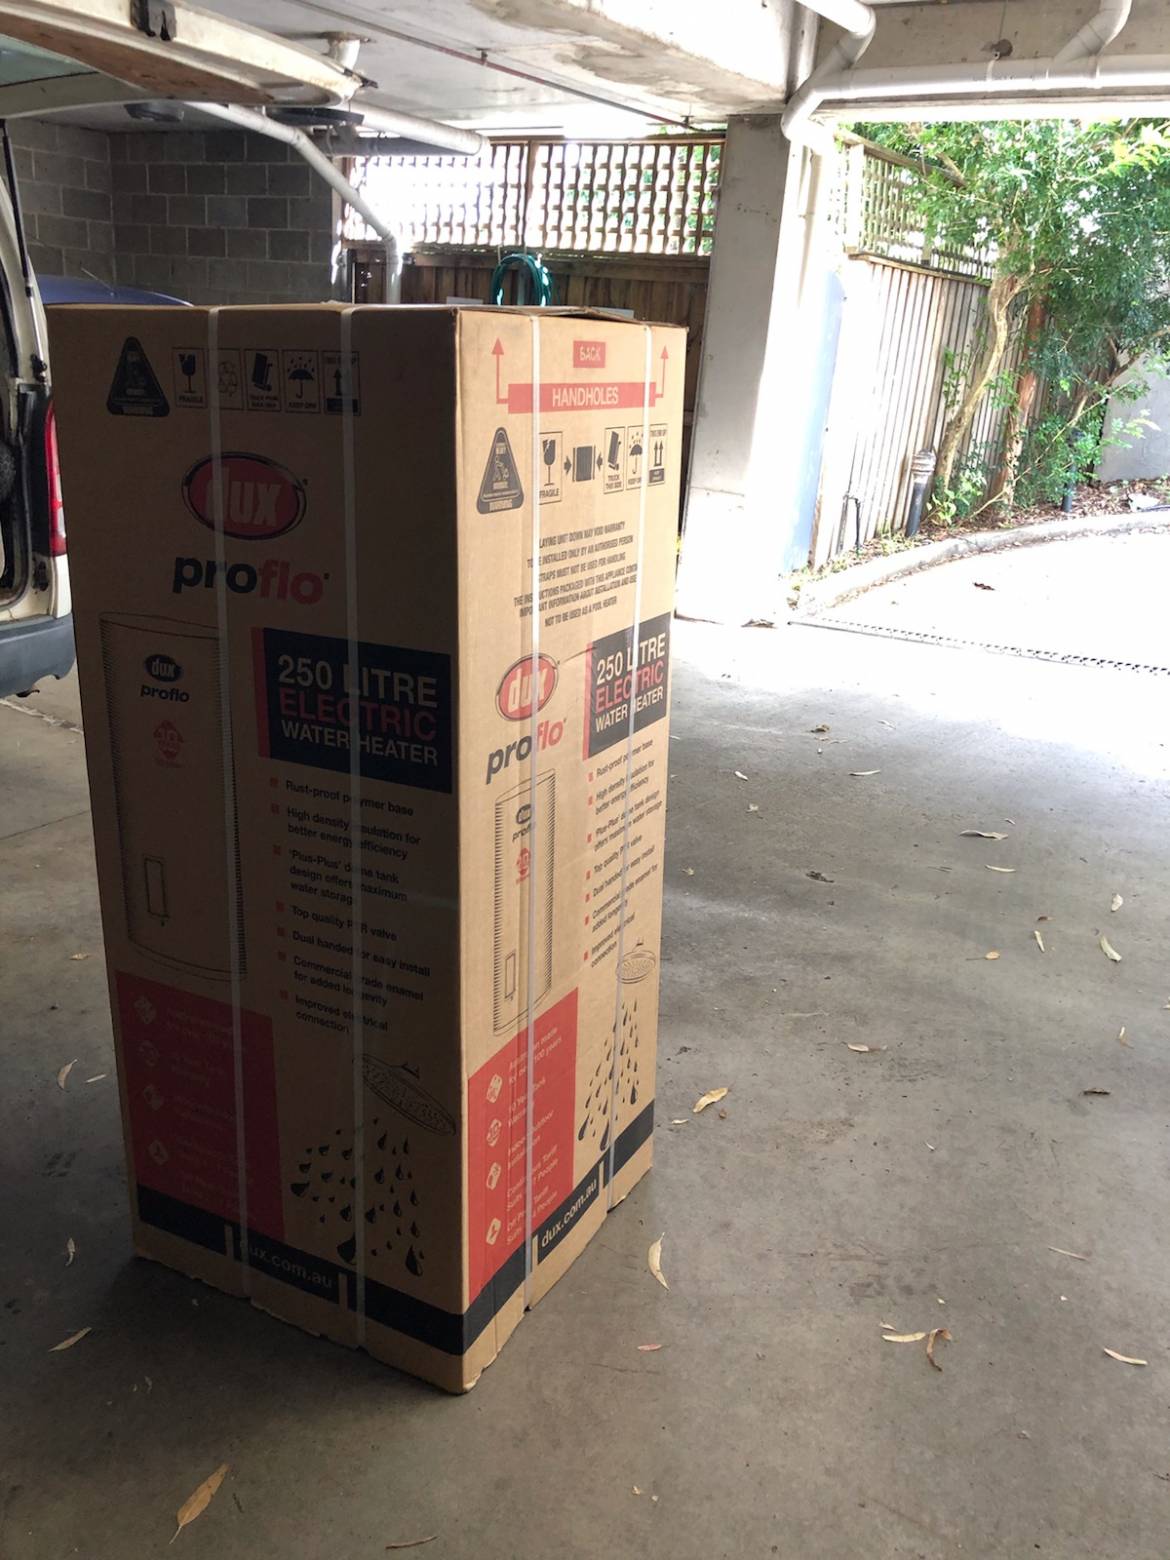 9.3.21-Dux-Proflo-250T136-electric-250ltr-hot-water-system-brand-new-in-box.jpg